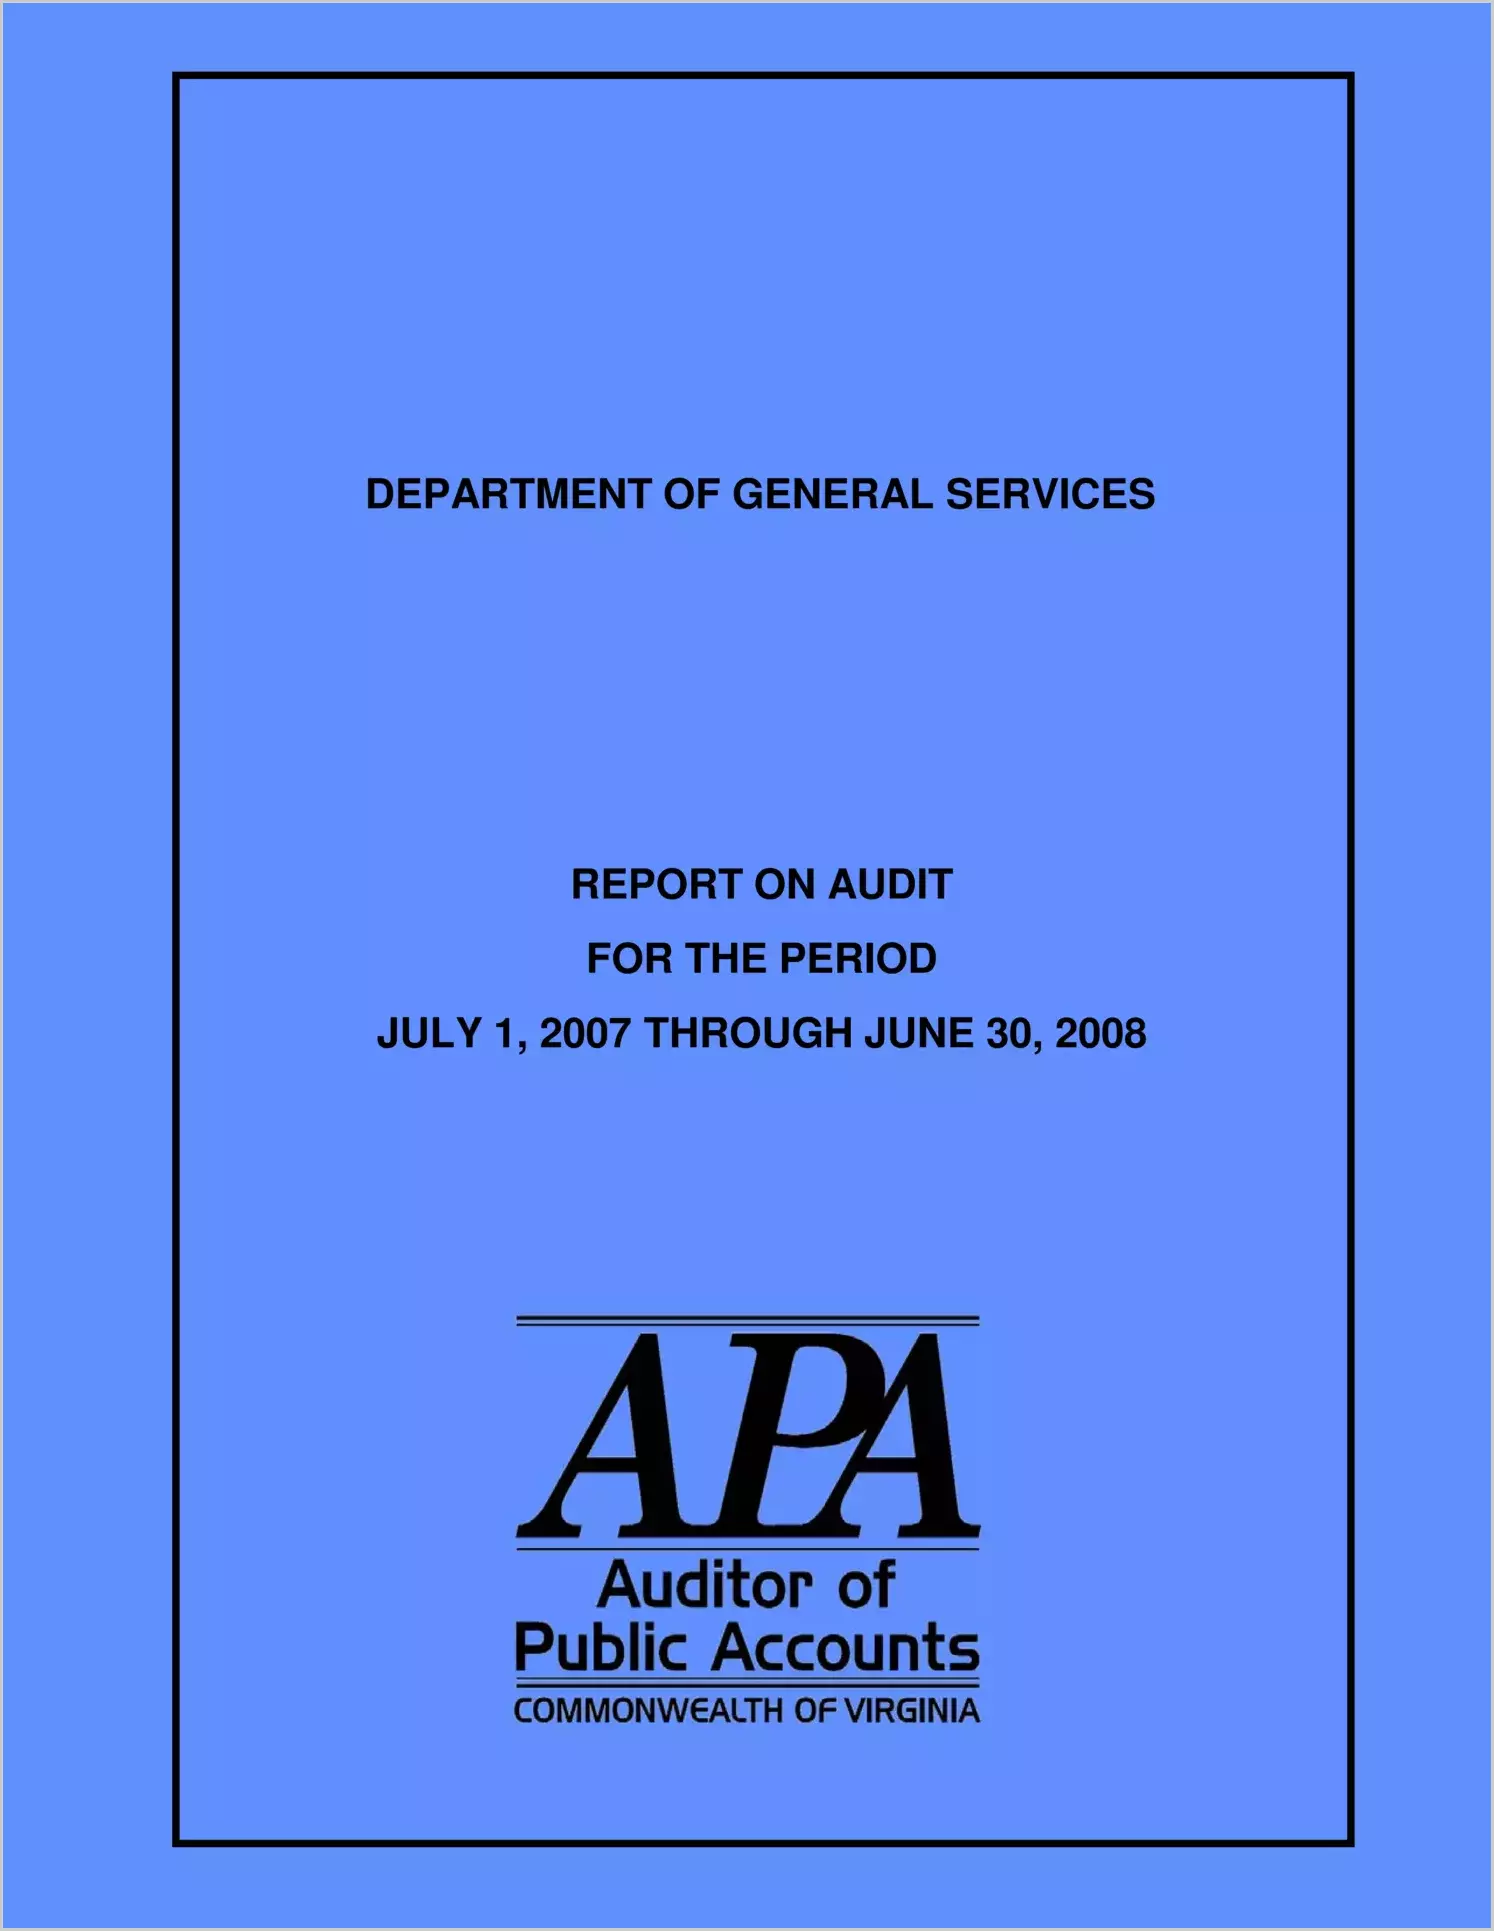 Department of General Services for the period June 30, 2007 through June 30, 2008